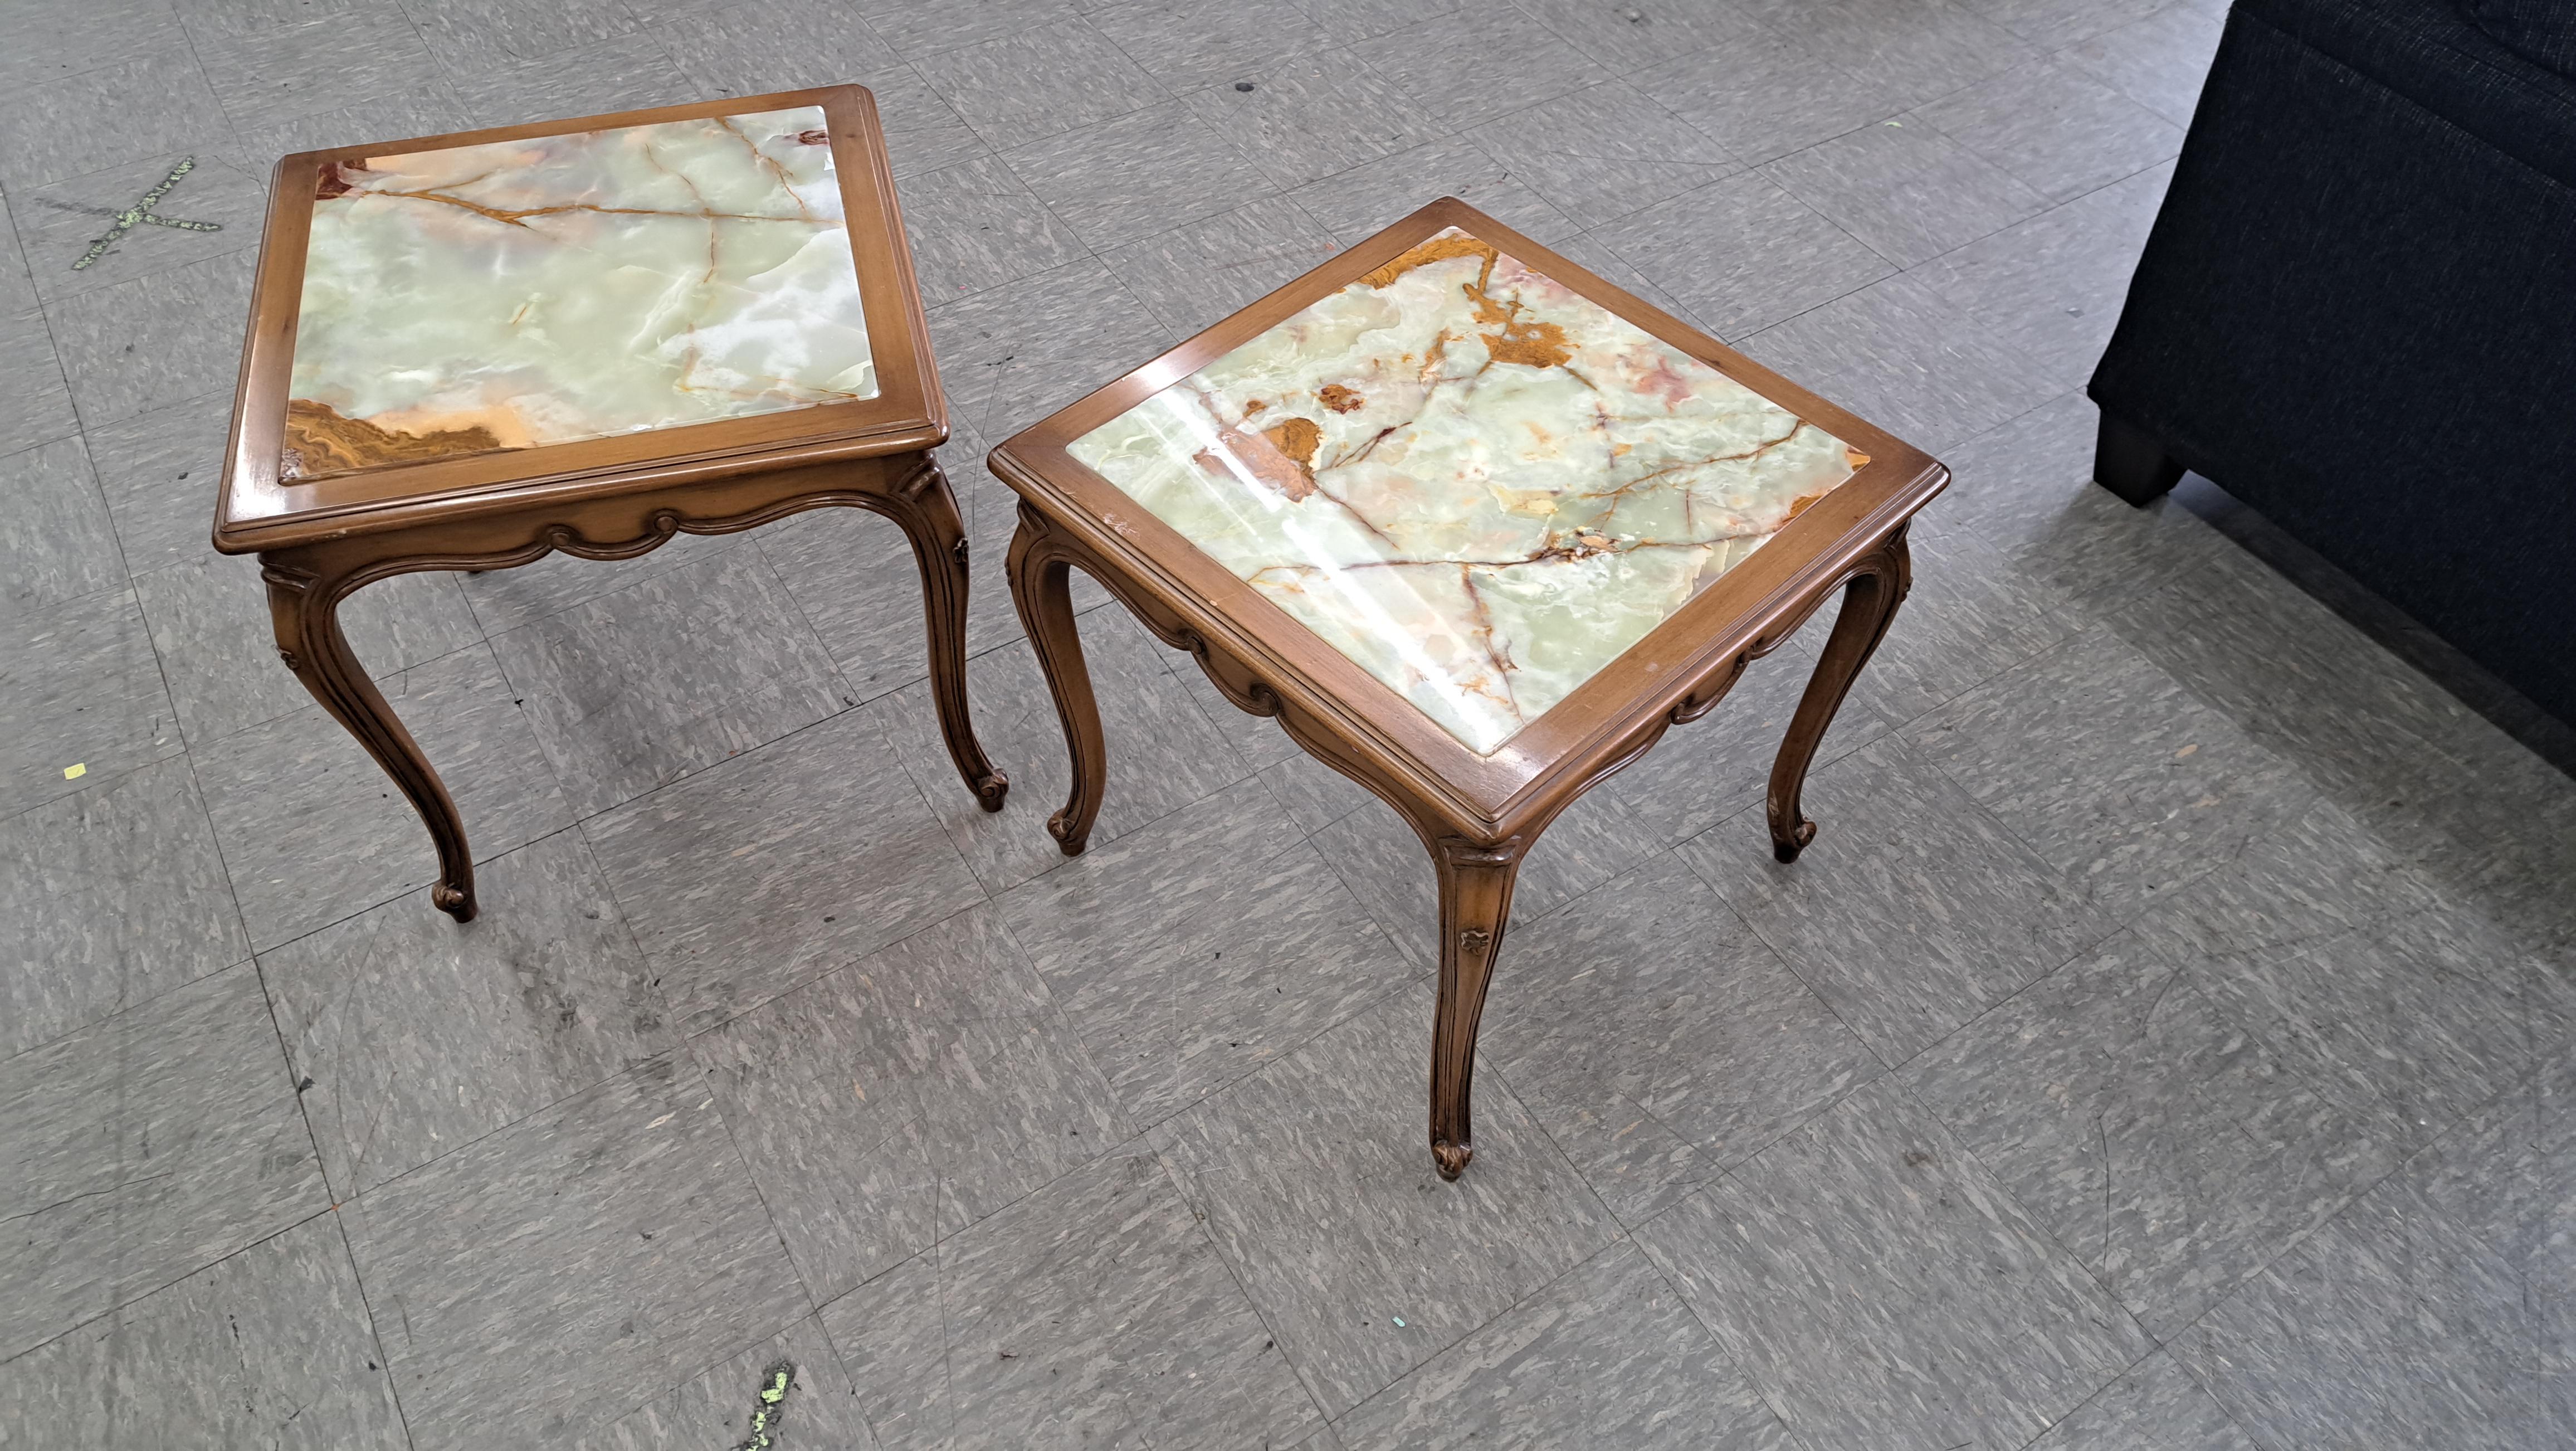 Pair of carved wood side tables with marble inserts. Louis XV style tables with elegantly carved legs and ornate wood framing the tile tops.